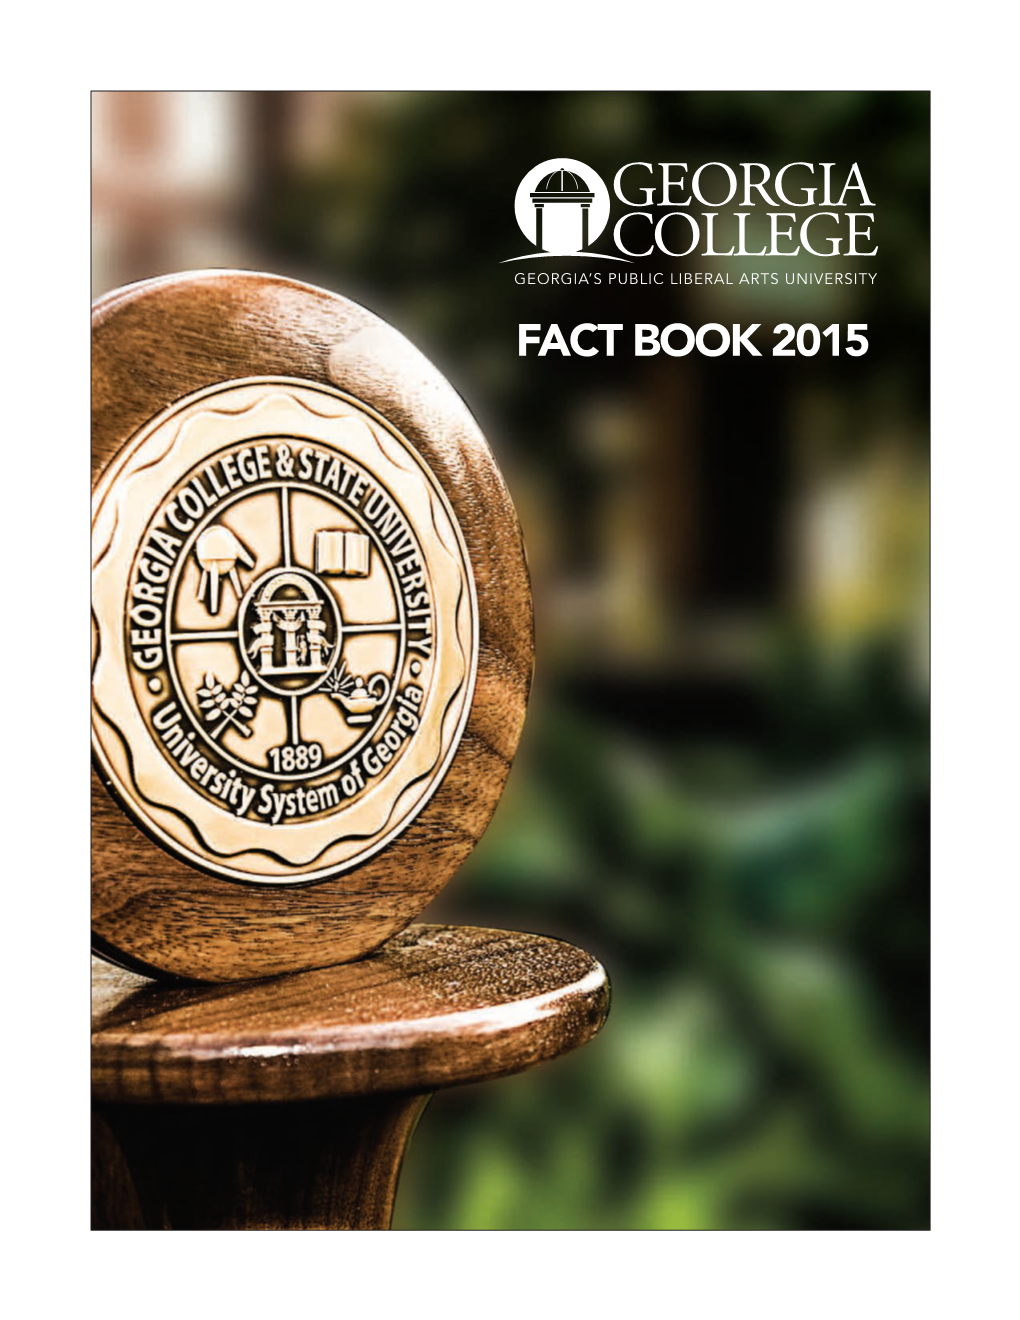 Fact Book 2015 Download